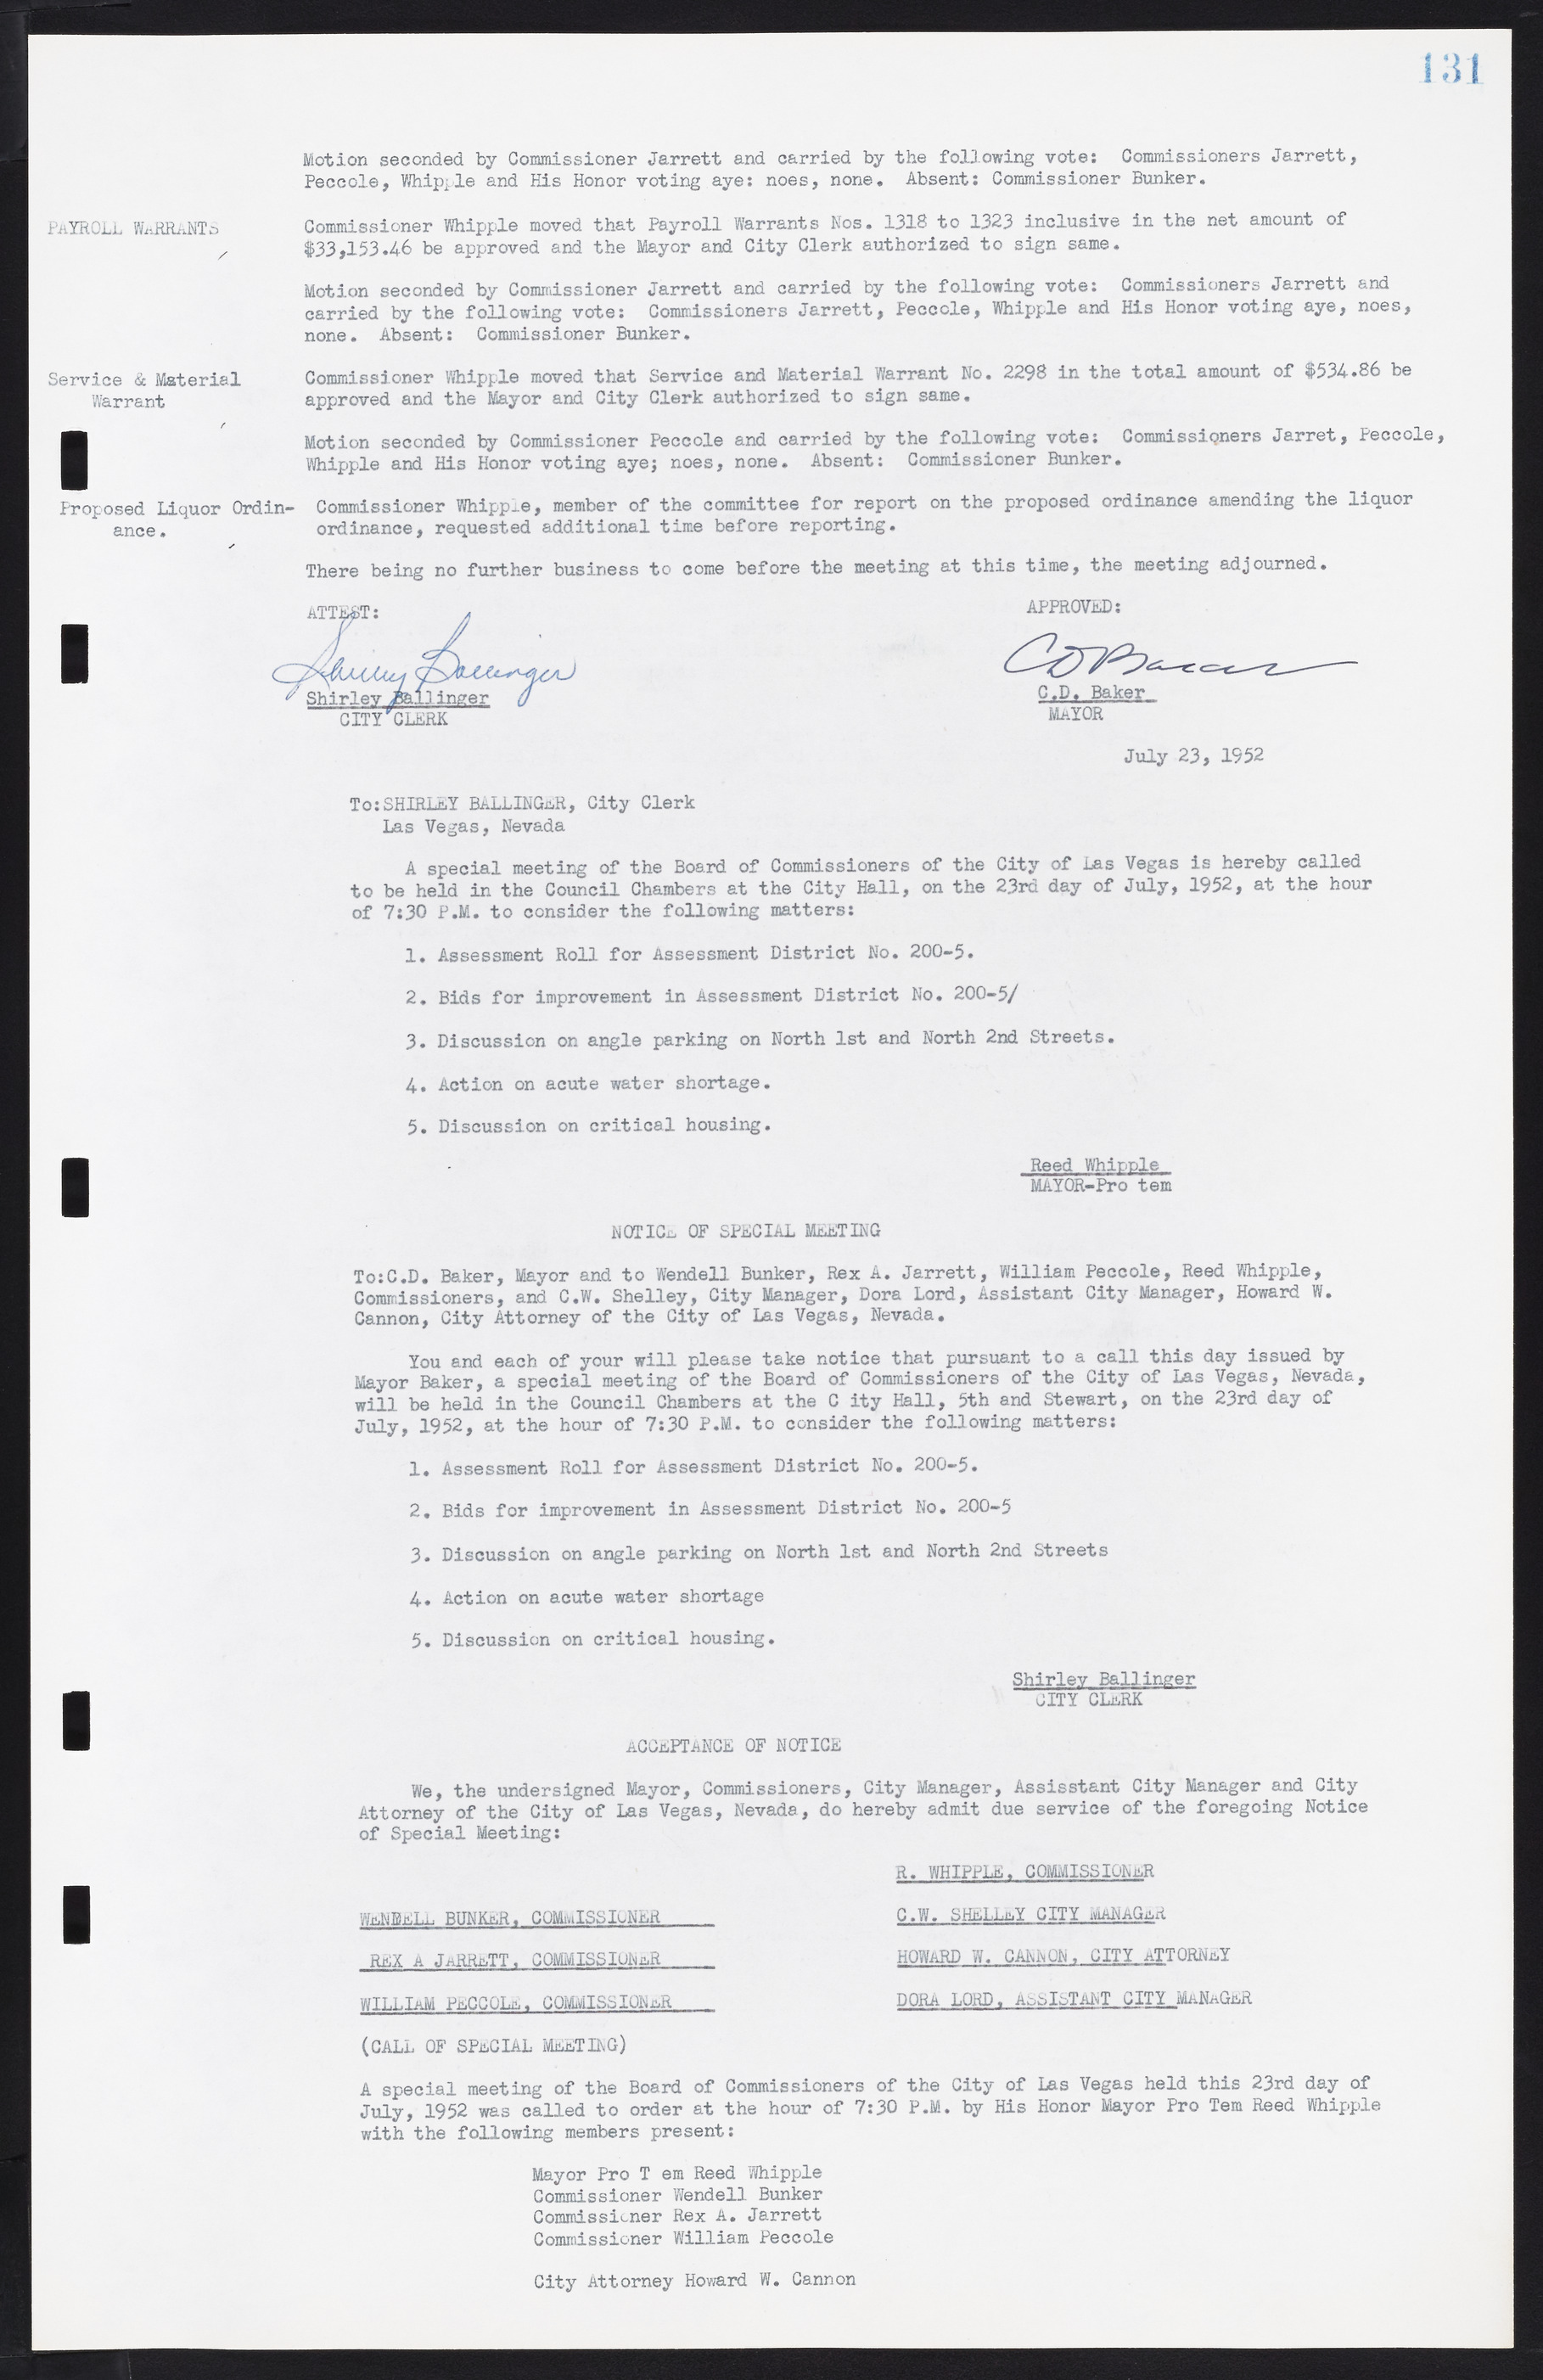 Las Vegas City Commission Minutes, May 26, 1952 to February 17, 1954, lvc000008-137